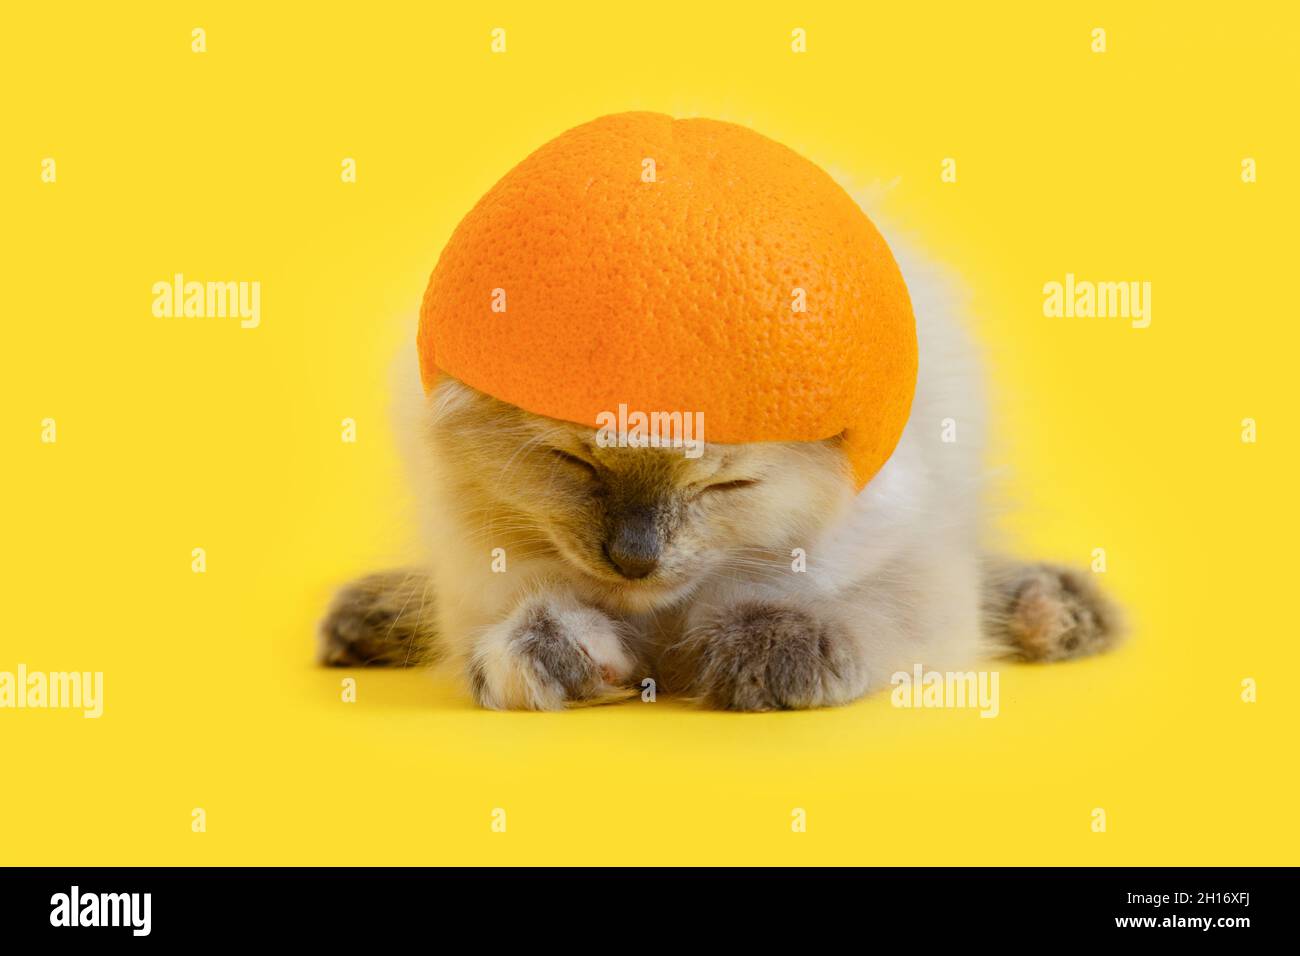 Submissive leaning cat in citrus orange helmet Isolated on color Yellow background with copy space. Creative concept funny Domestic kitten pet Animal Stock Photo